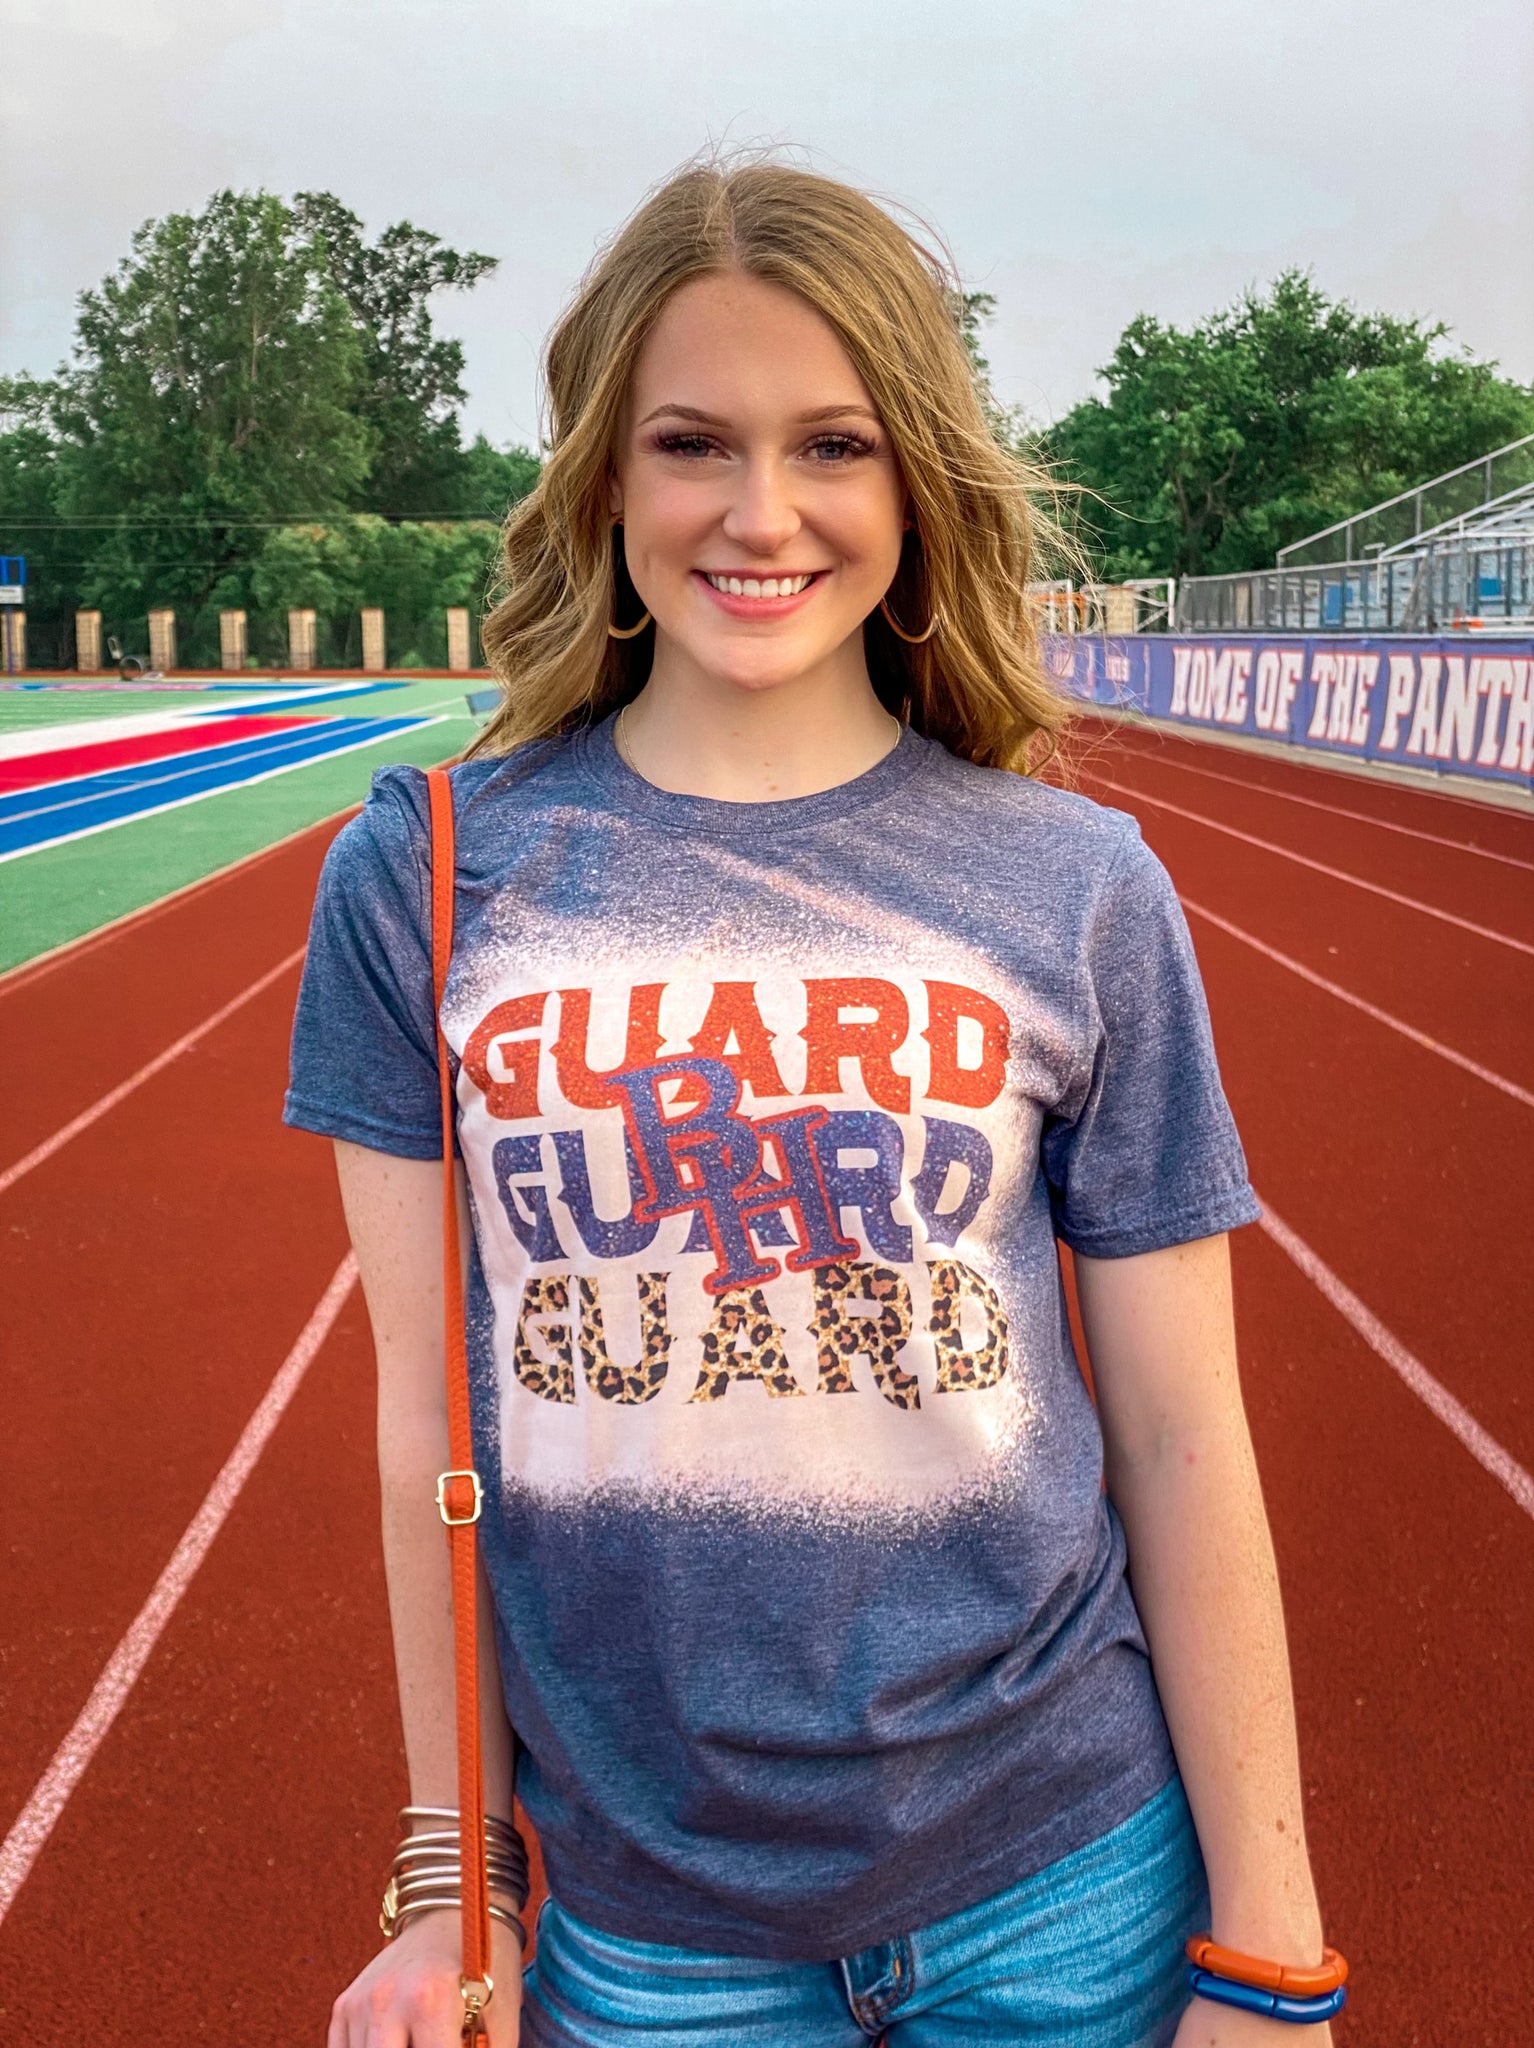 GUARD GUARD GUARD Sublimation Glitter Bleached Tee